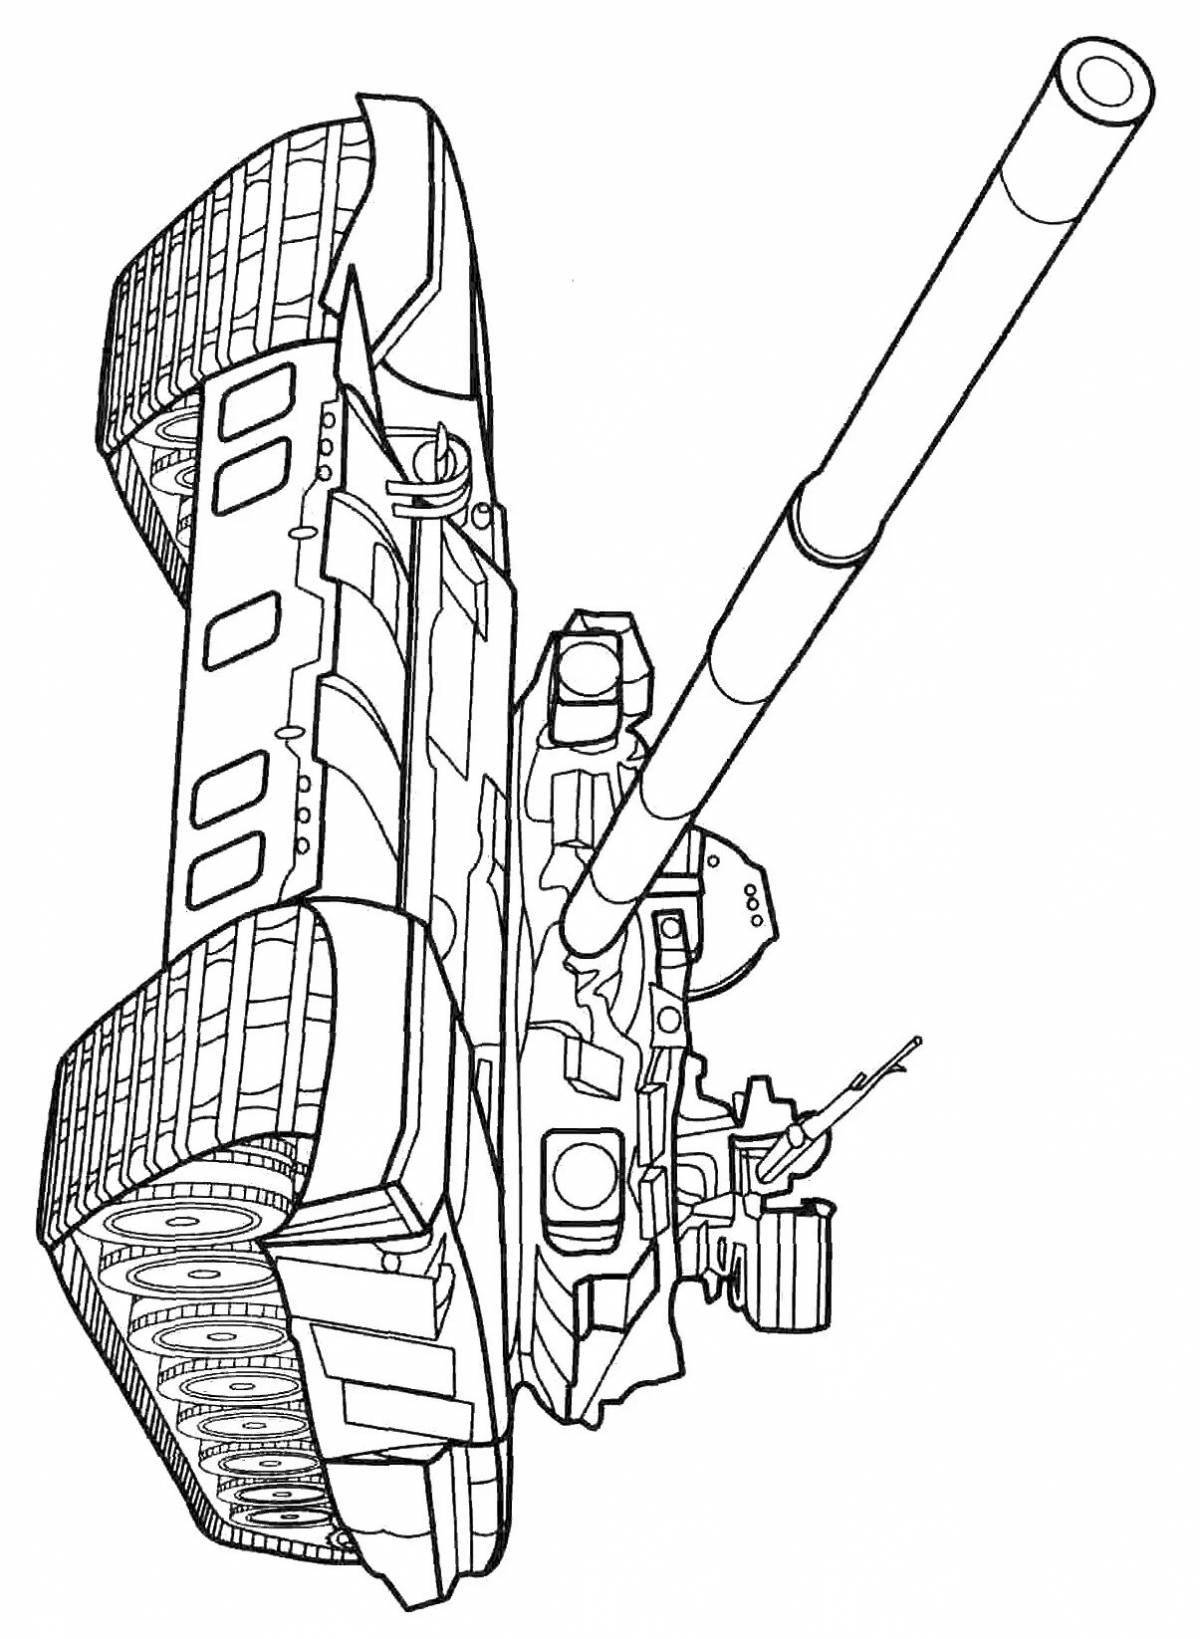 Decorative t90 tank coloring page